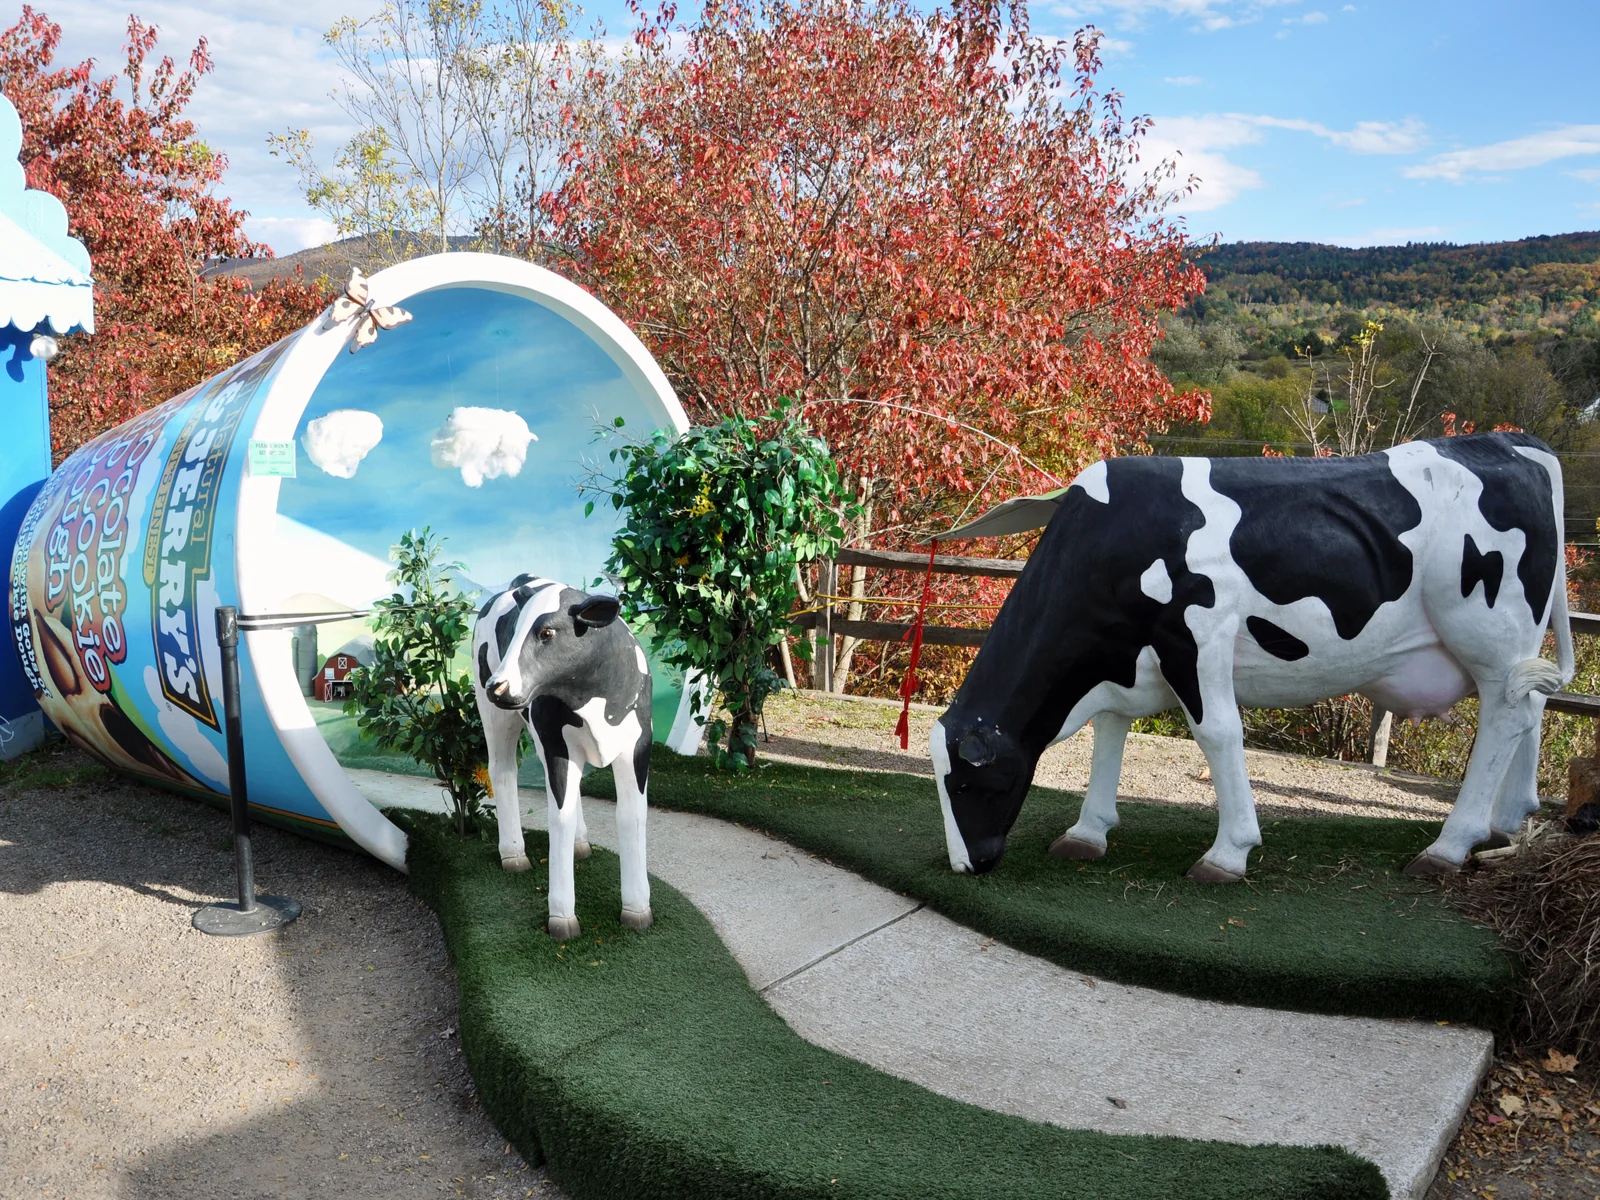 Ben and Jerry's ice cream factory in Vermont, one of the best things to do in the state